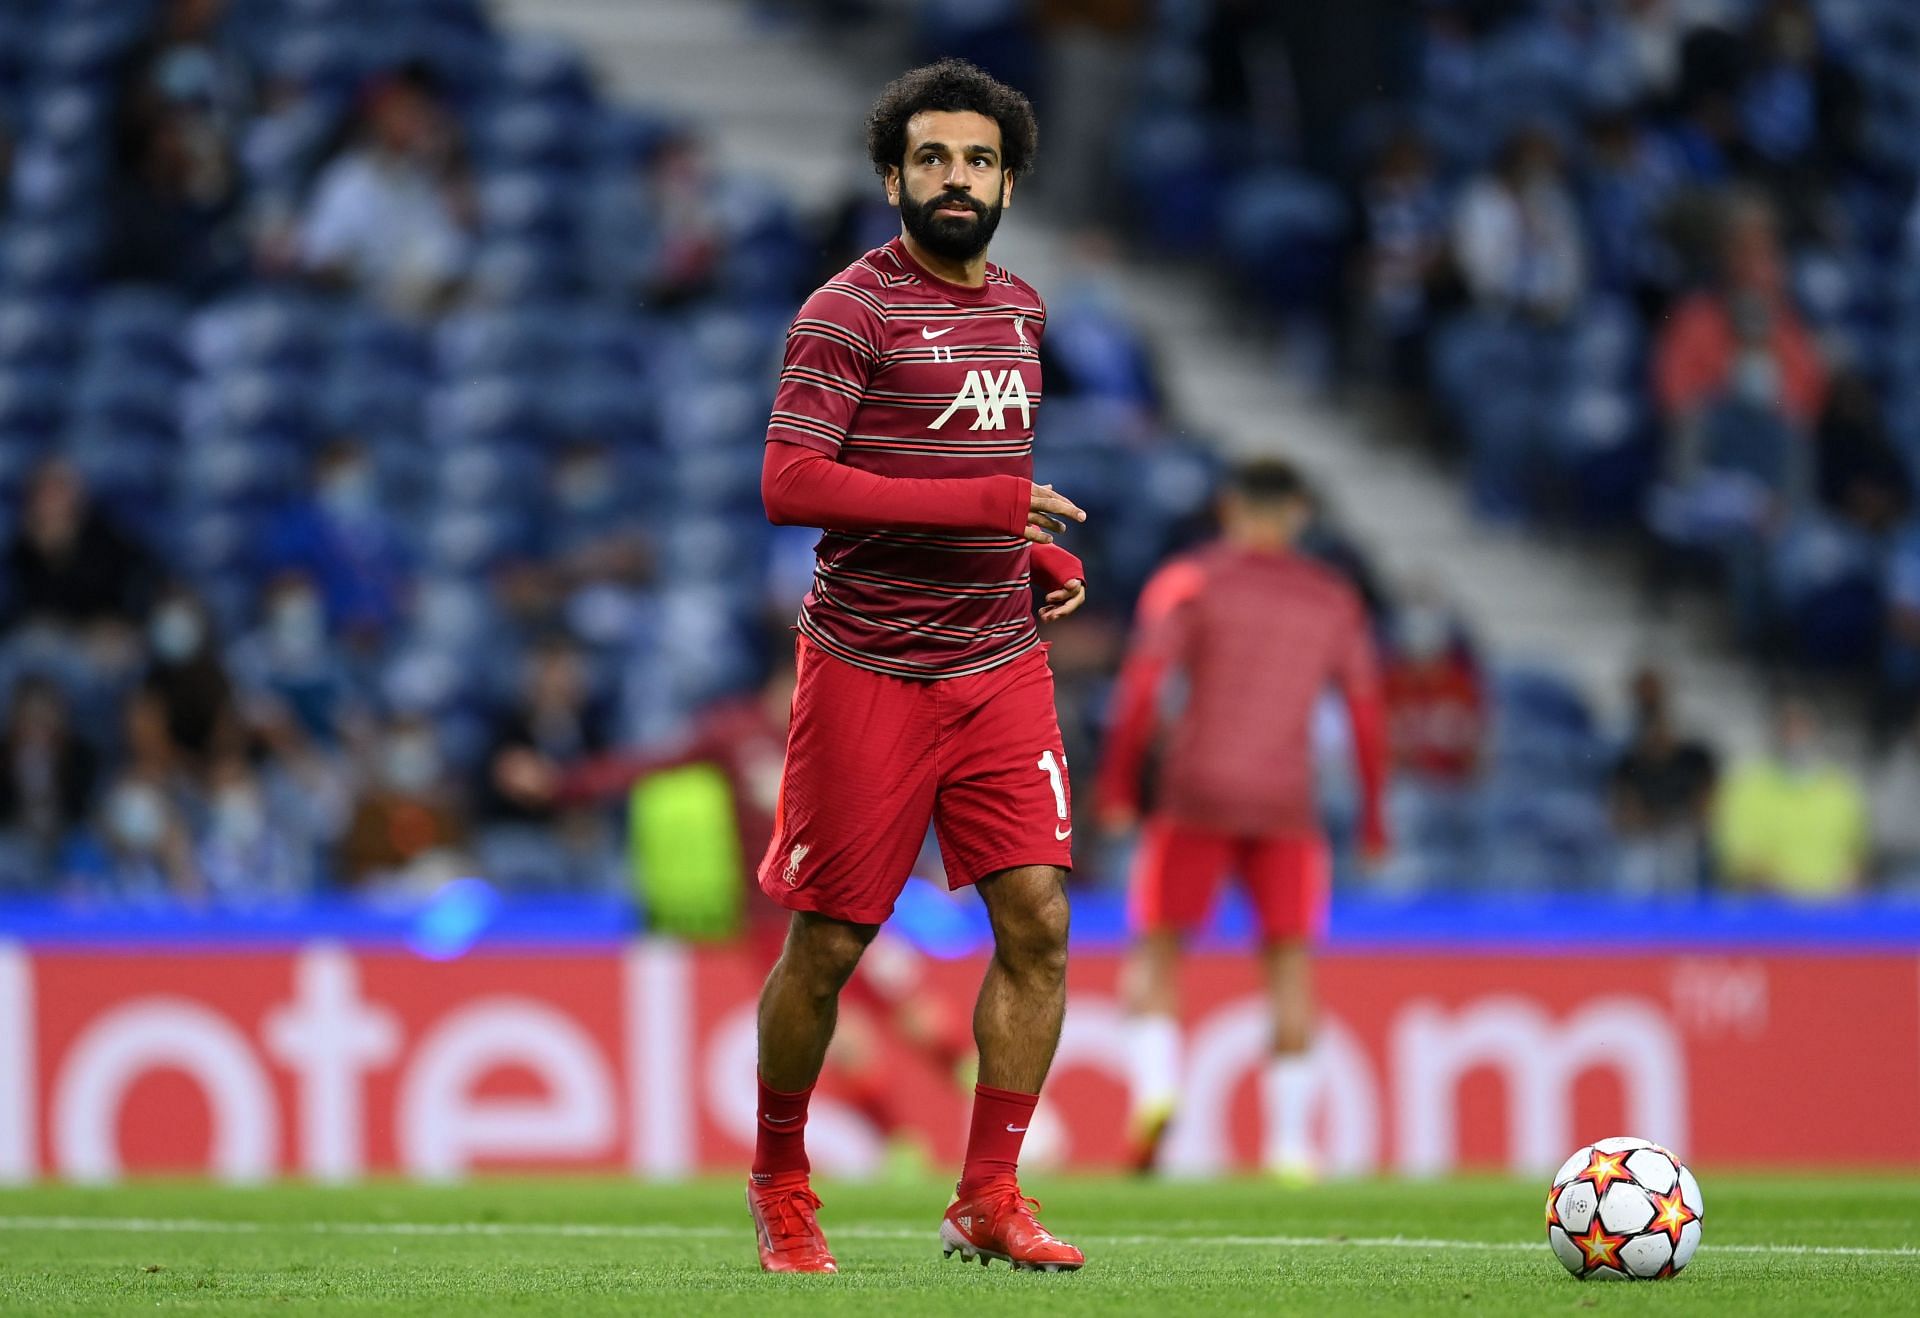 Salah has 11 goal involvements (7 goals and 4 assists) from just 8 games